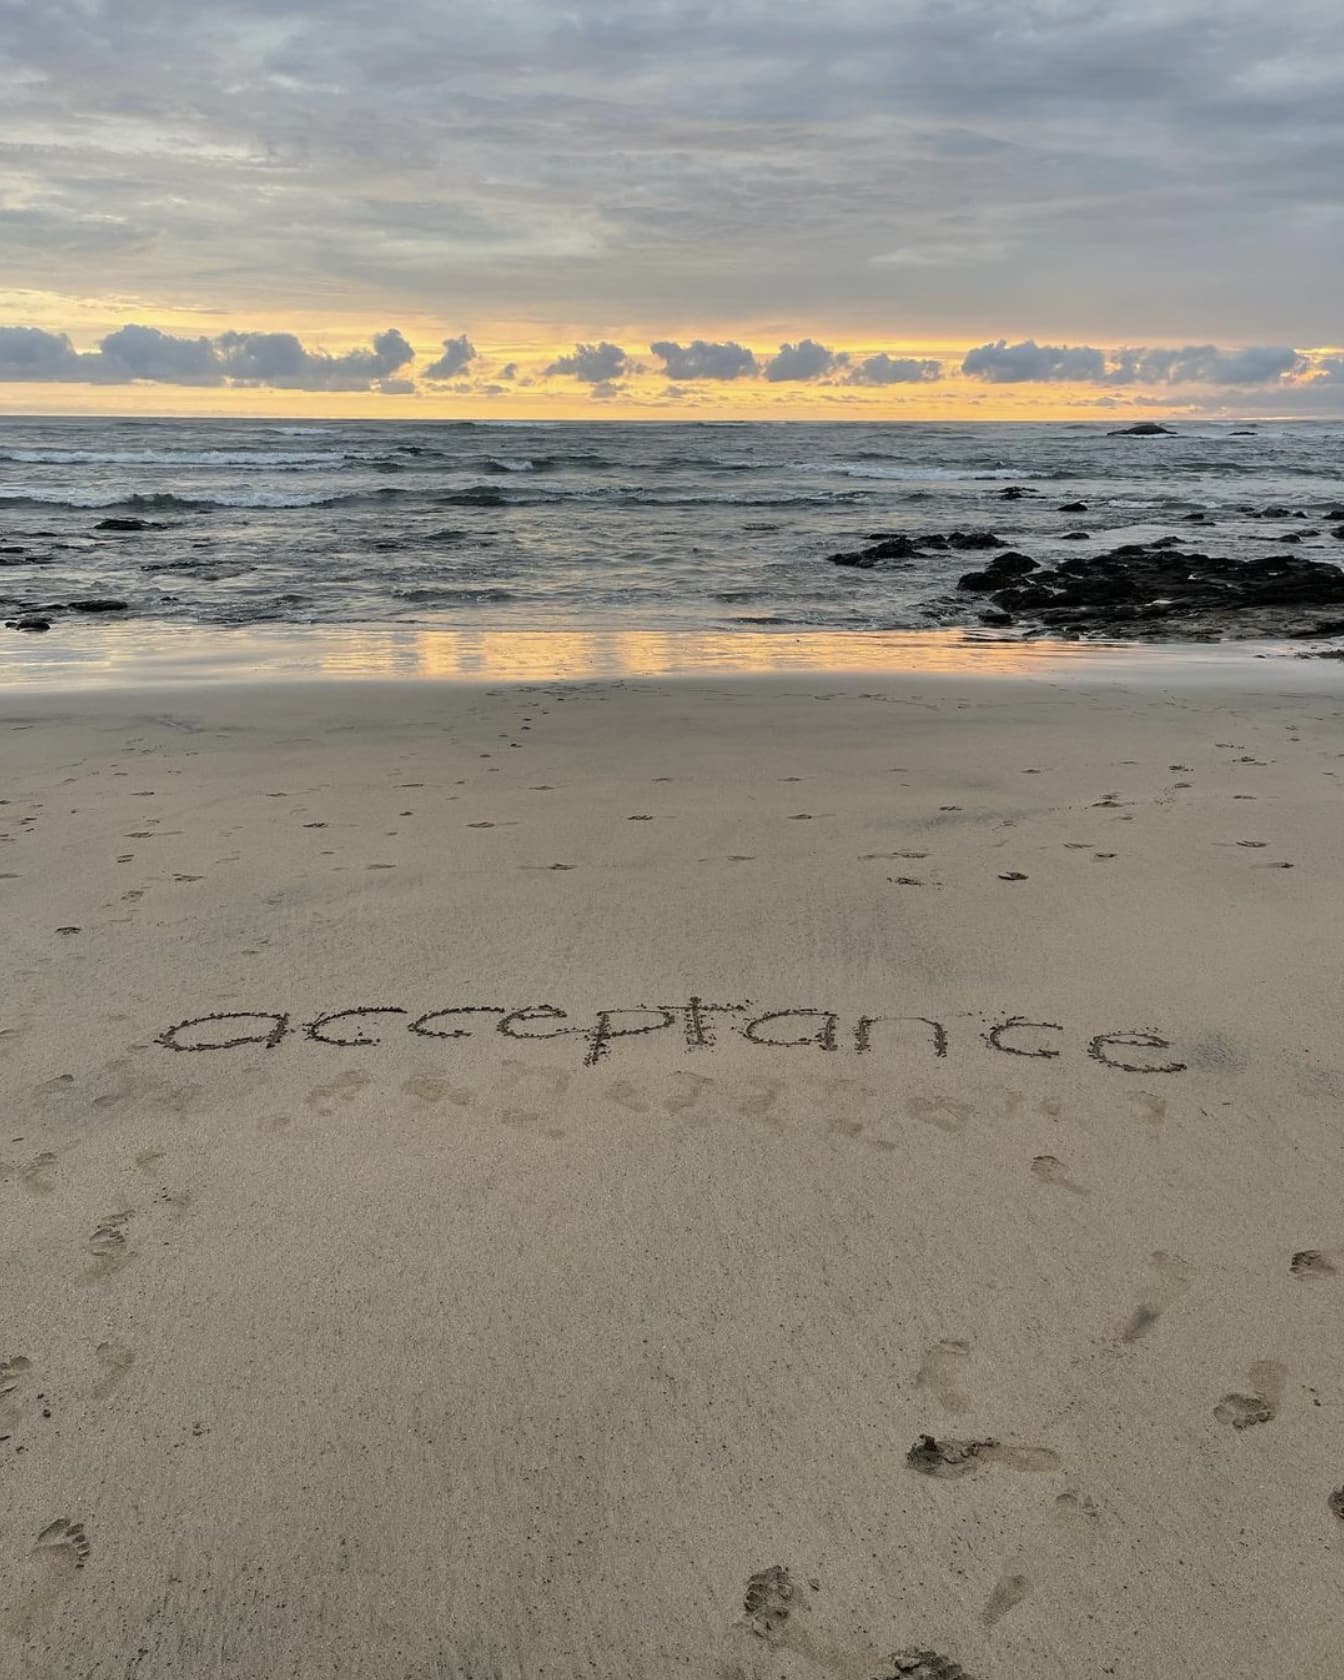 "...disconnect and reflect on what matters most..." Cathy Hackl, Costa Rica, August 2022